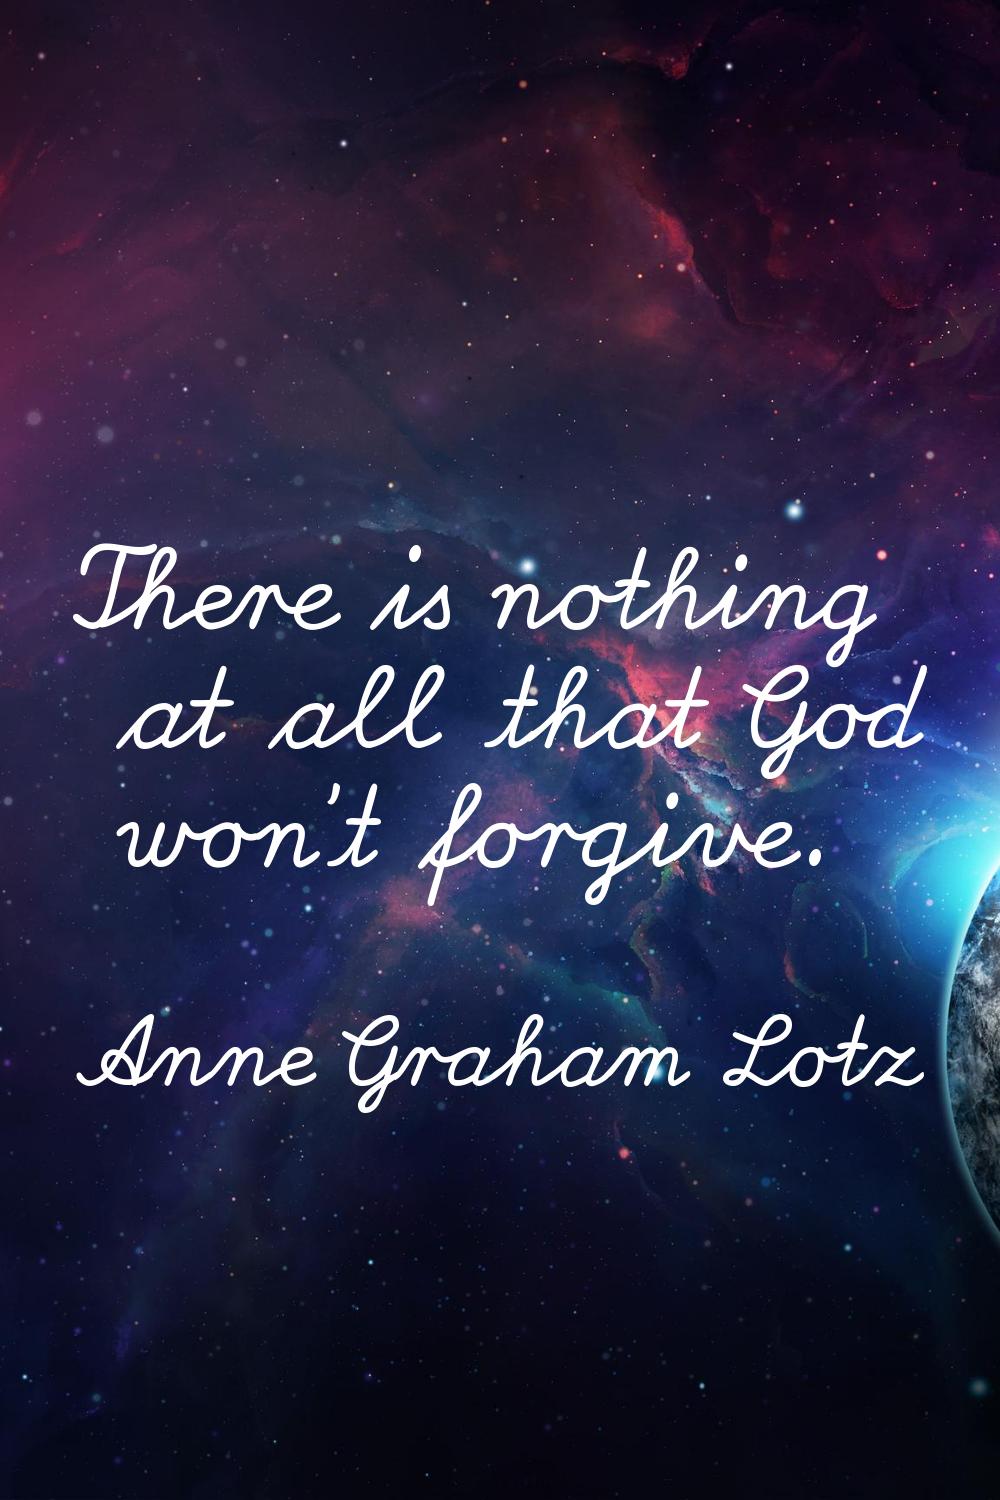 There is nothing at all that God won't forgive.